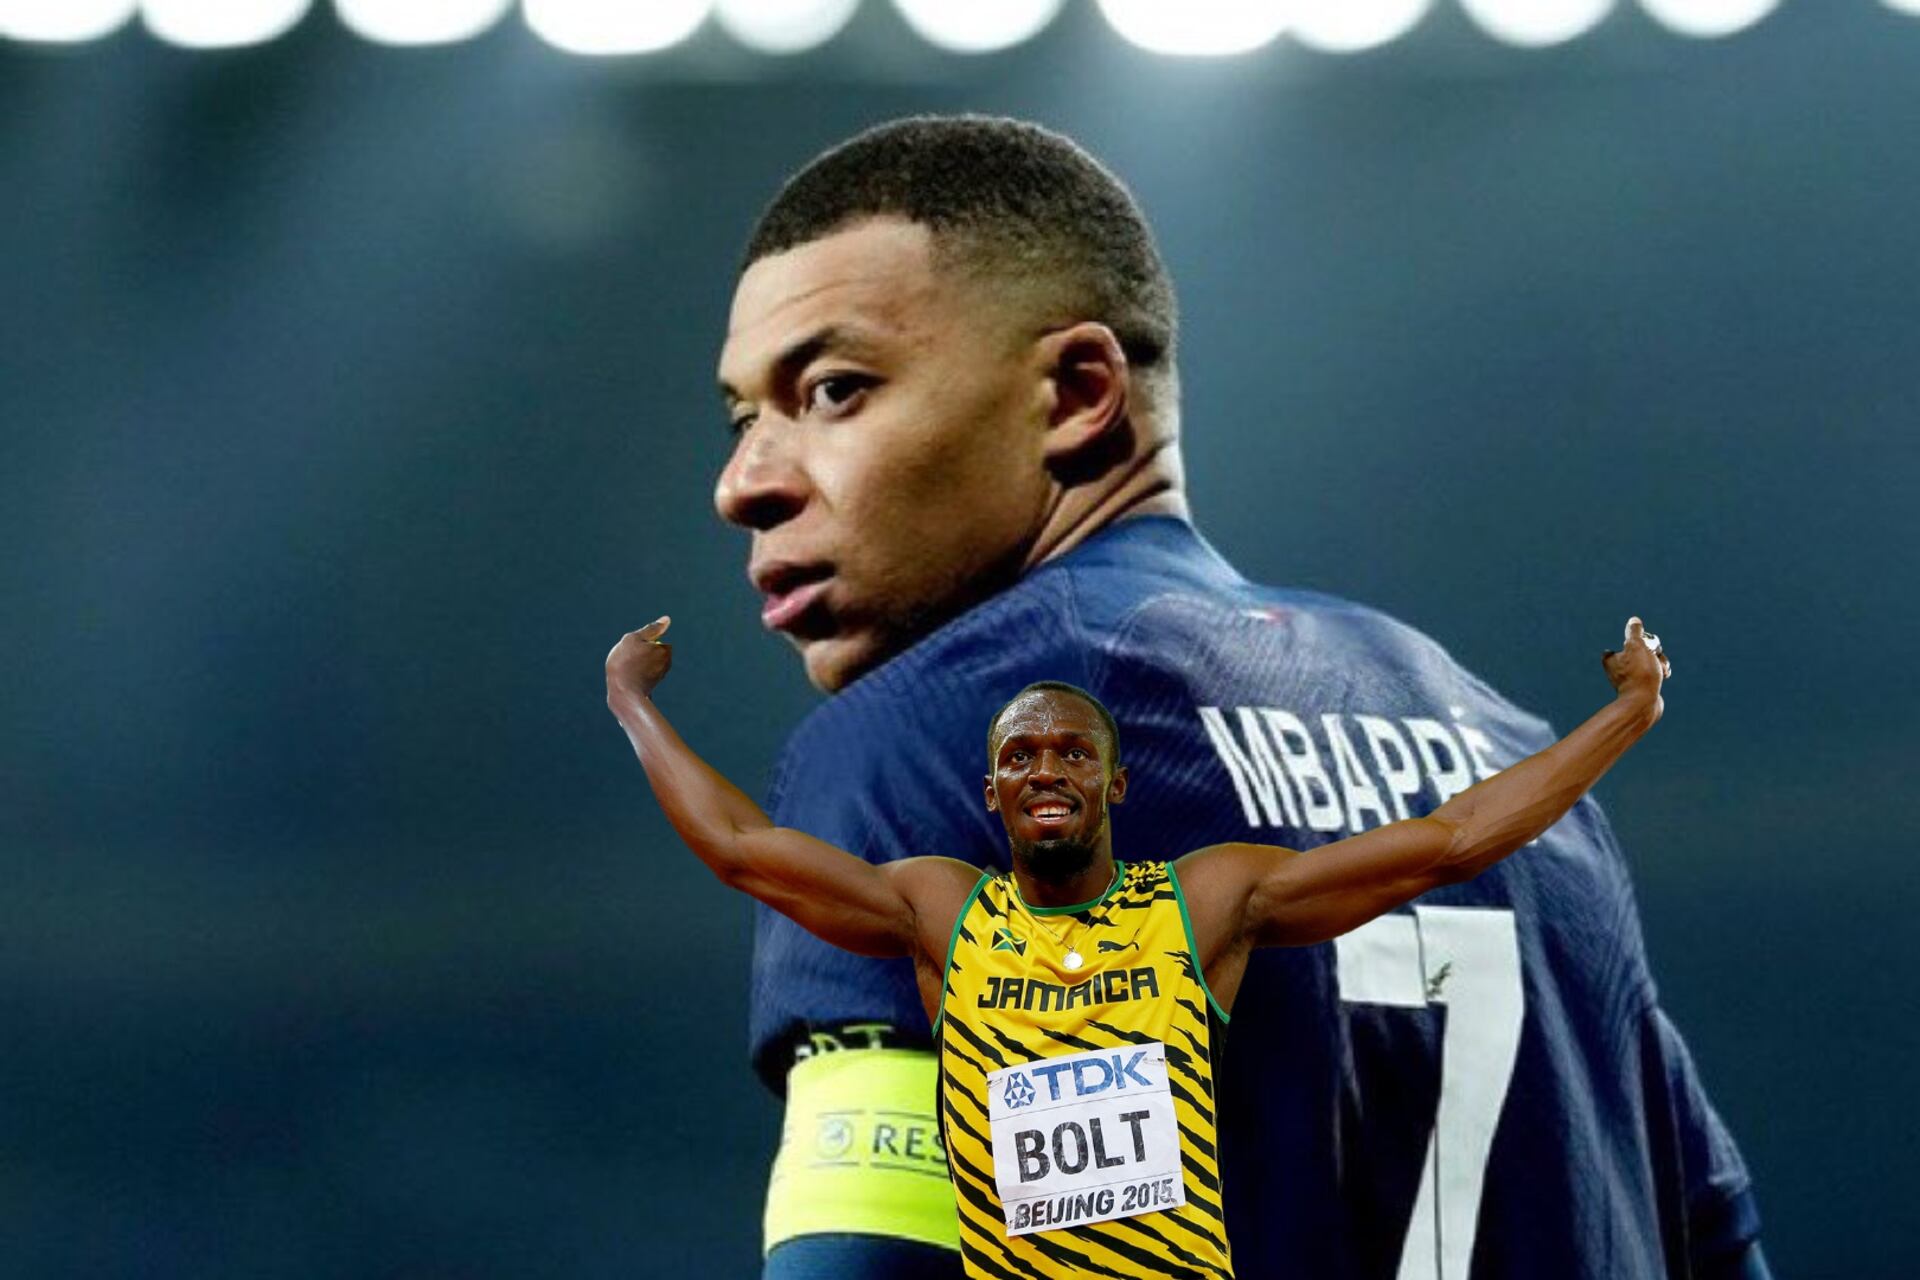 Is Mbappé scared? Usain Bolt challenged the Frenchman to a 100m race and this is what Kylian said about it